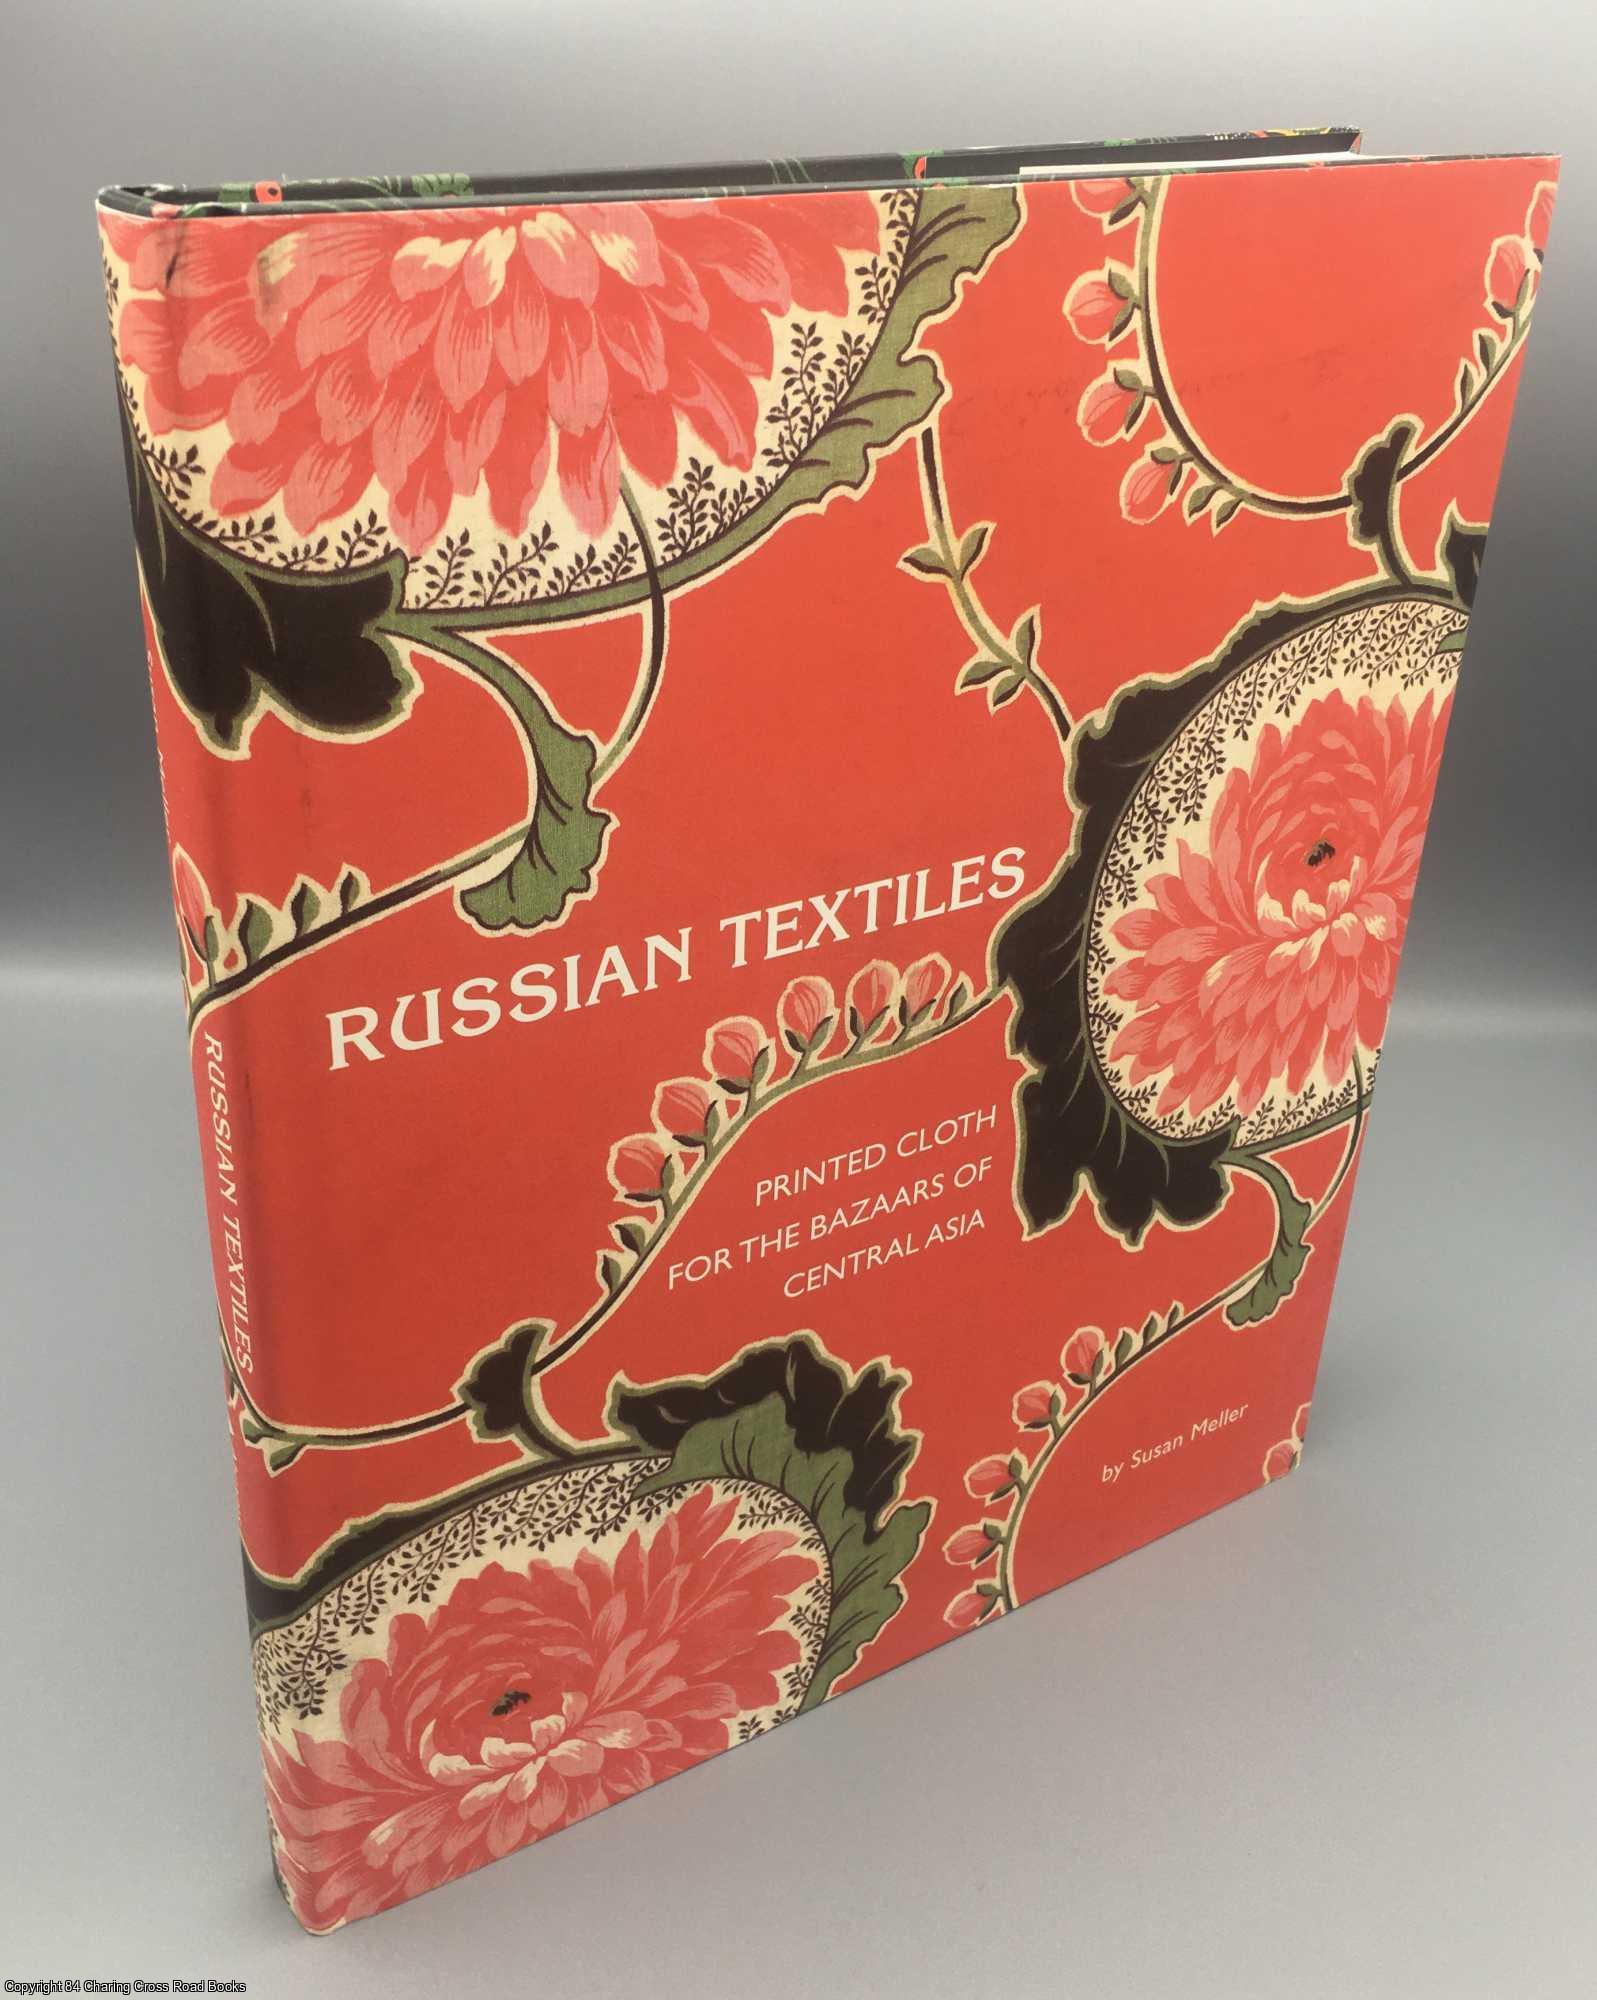 Meller, Susan - Russian Textiles: Printed Cloth for the Bazaars of Central Asia